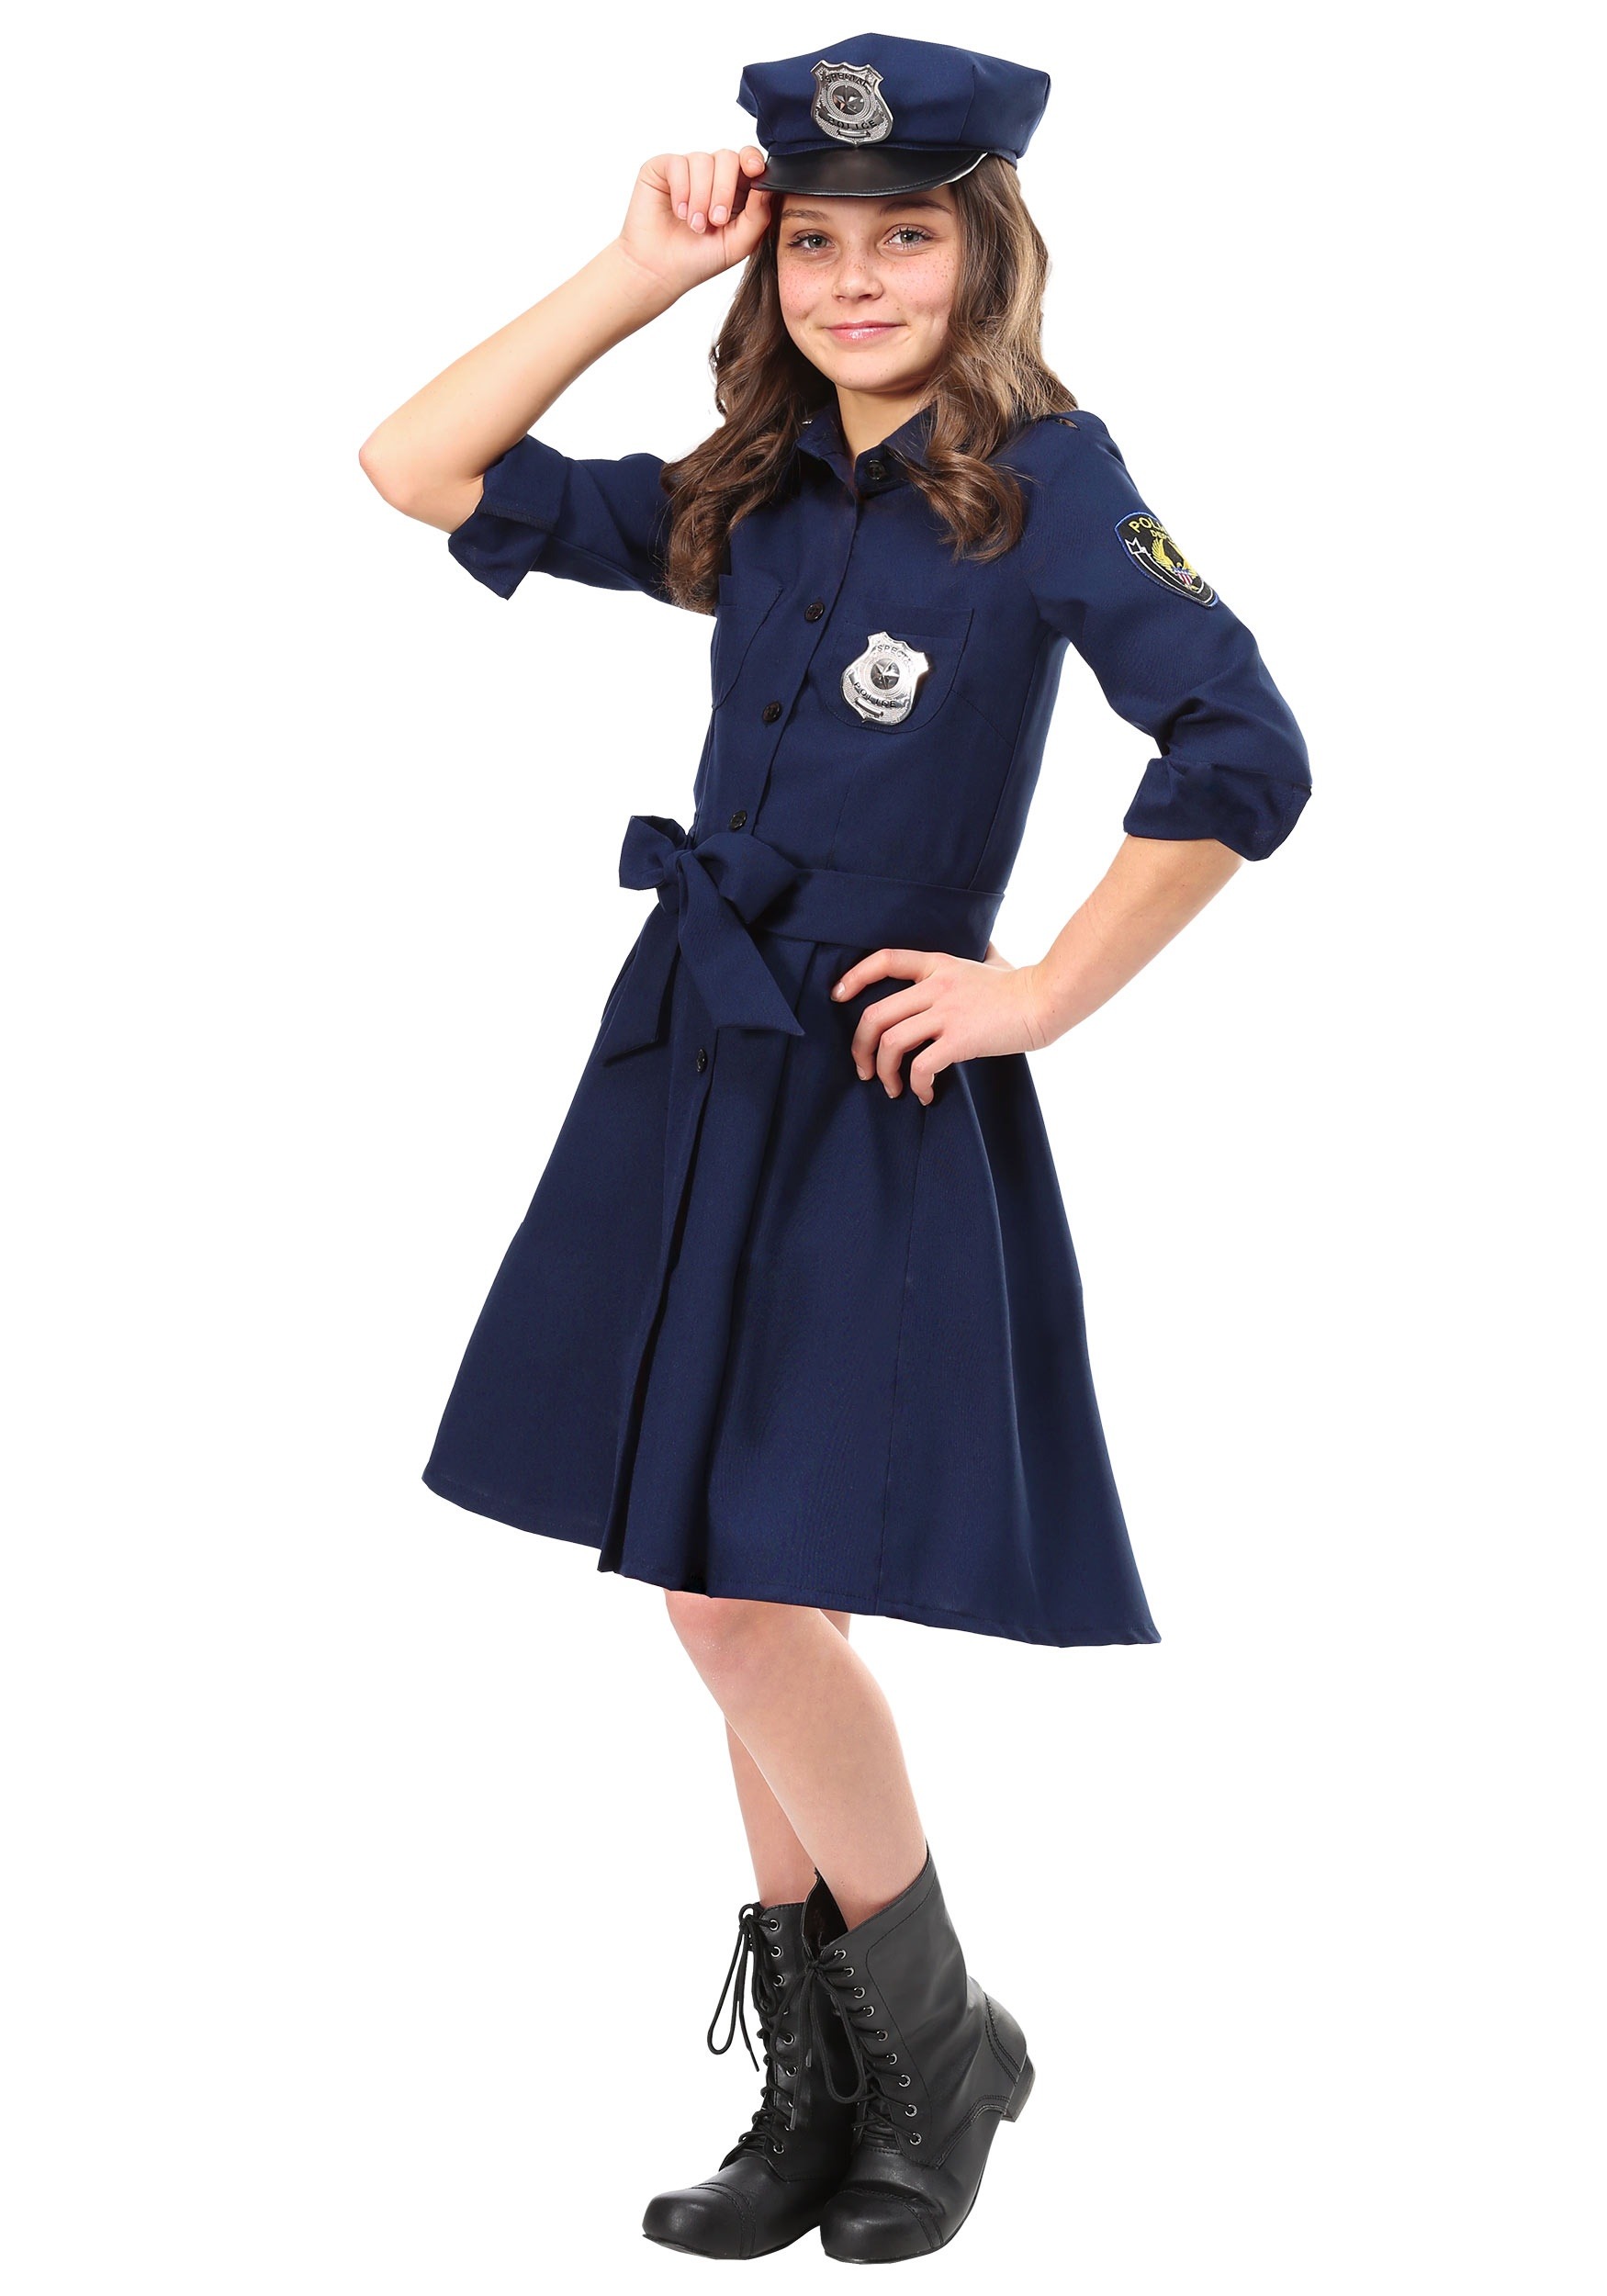 Police Officer Cop Costume For Girls